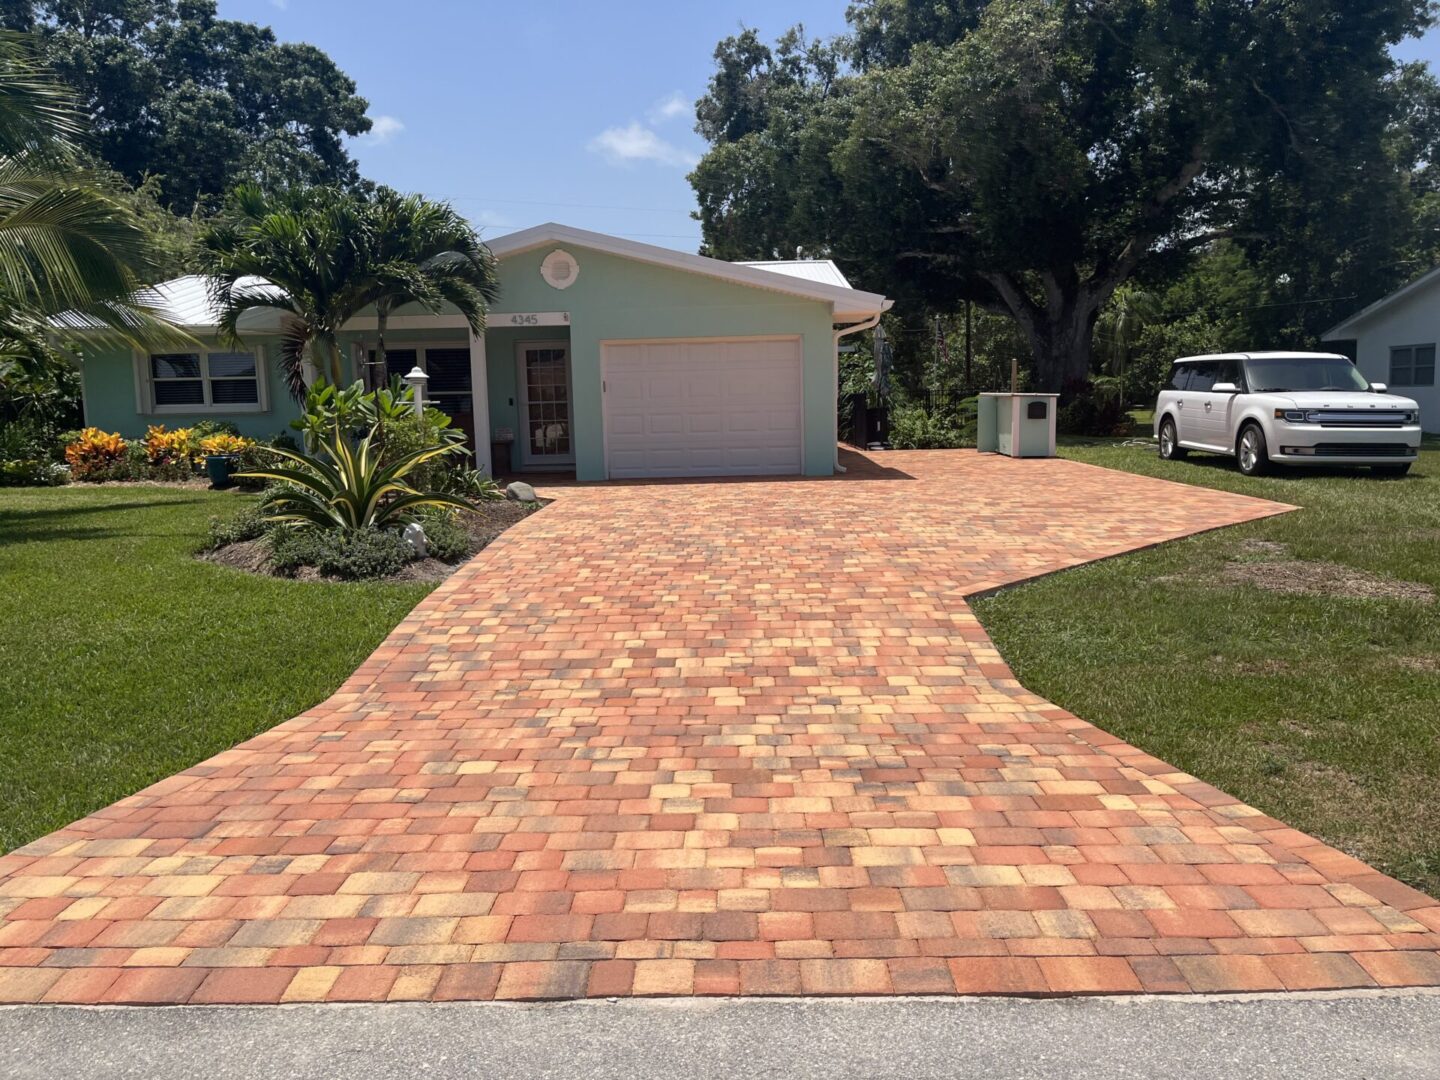 A driveway with brick pavers and palm trees in the background.